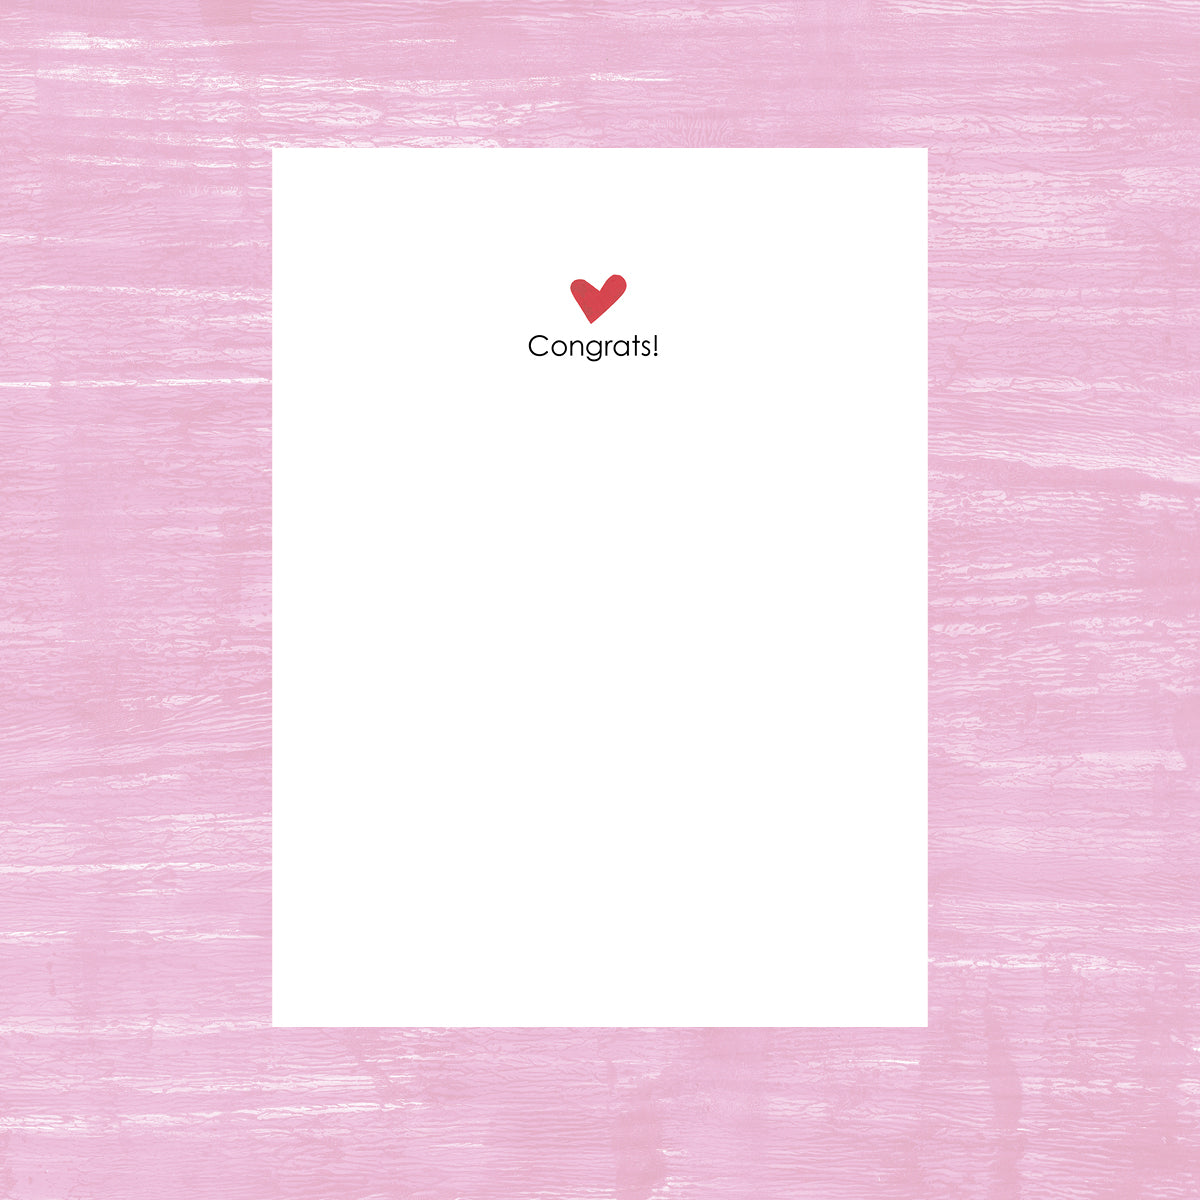 Love Looks Good on You Two - Greeting Card